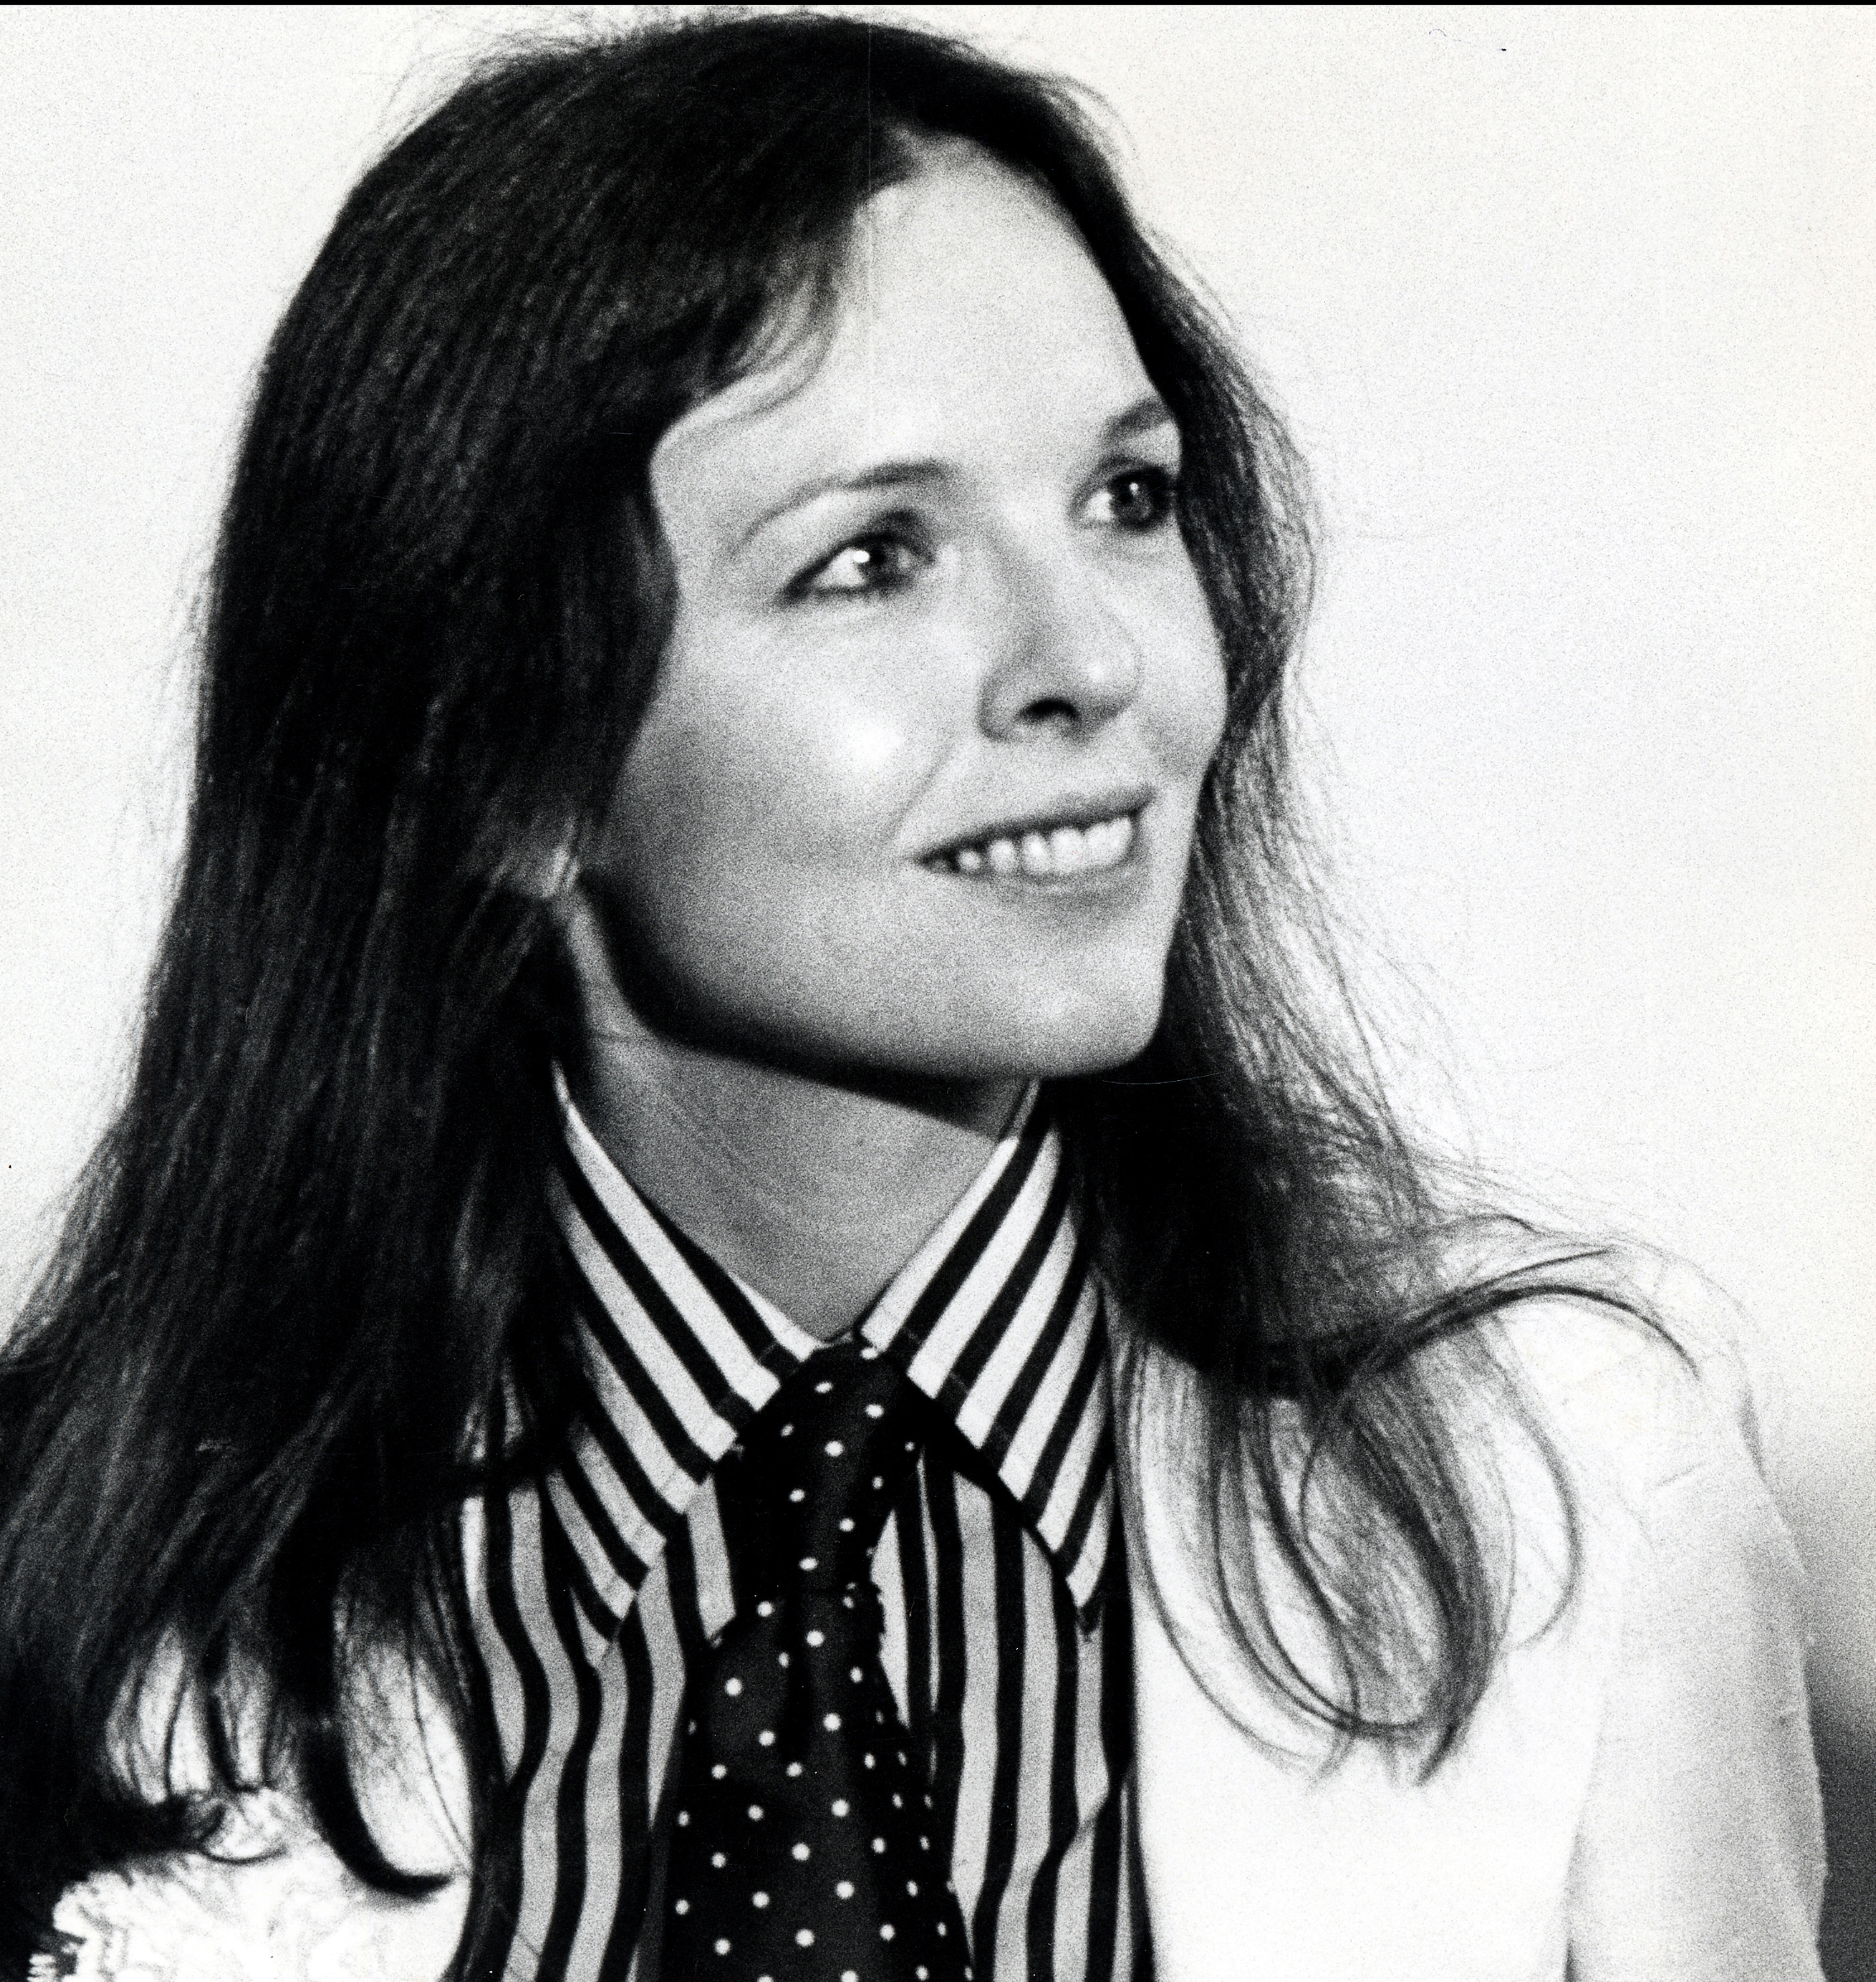 Diane Keaton photographed in 1976  | Source: Getty Images